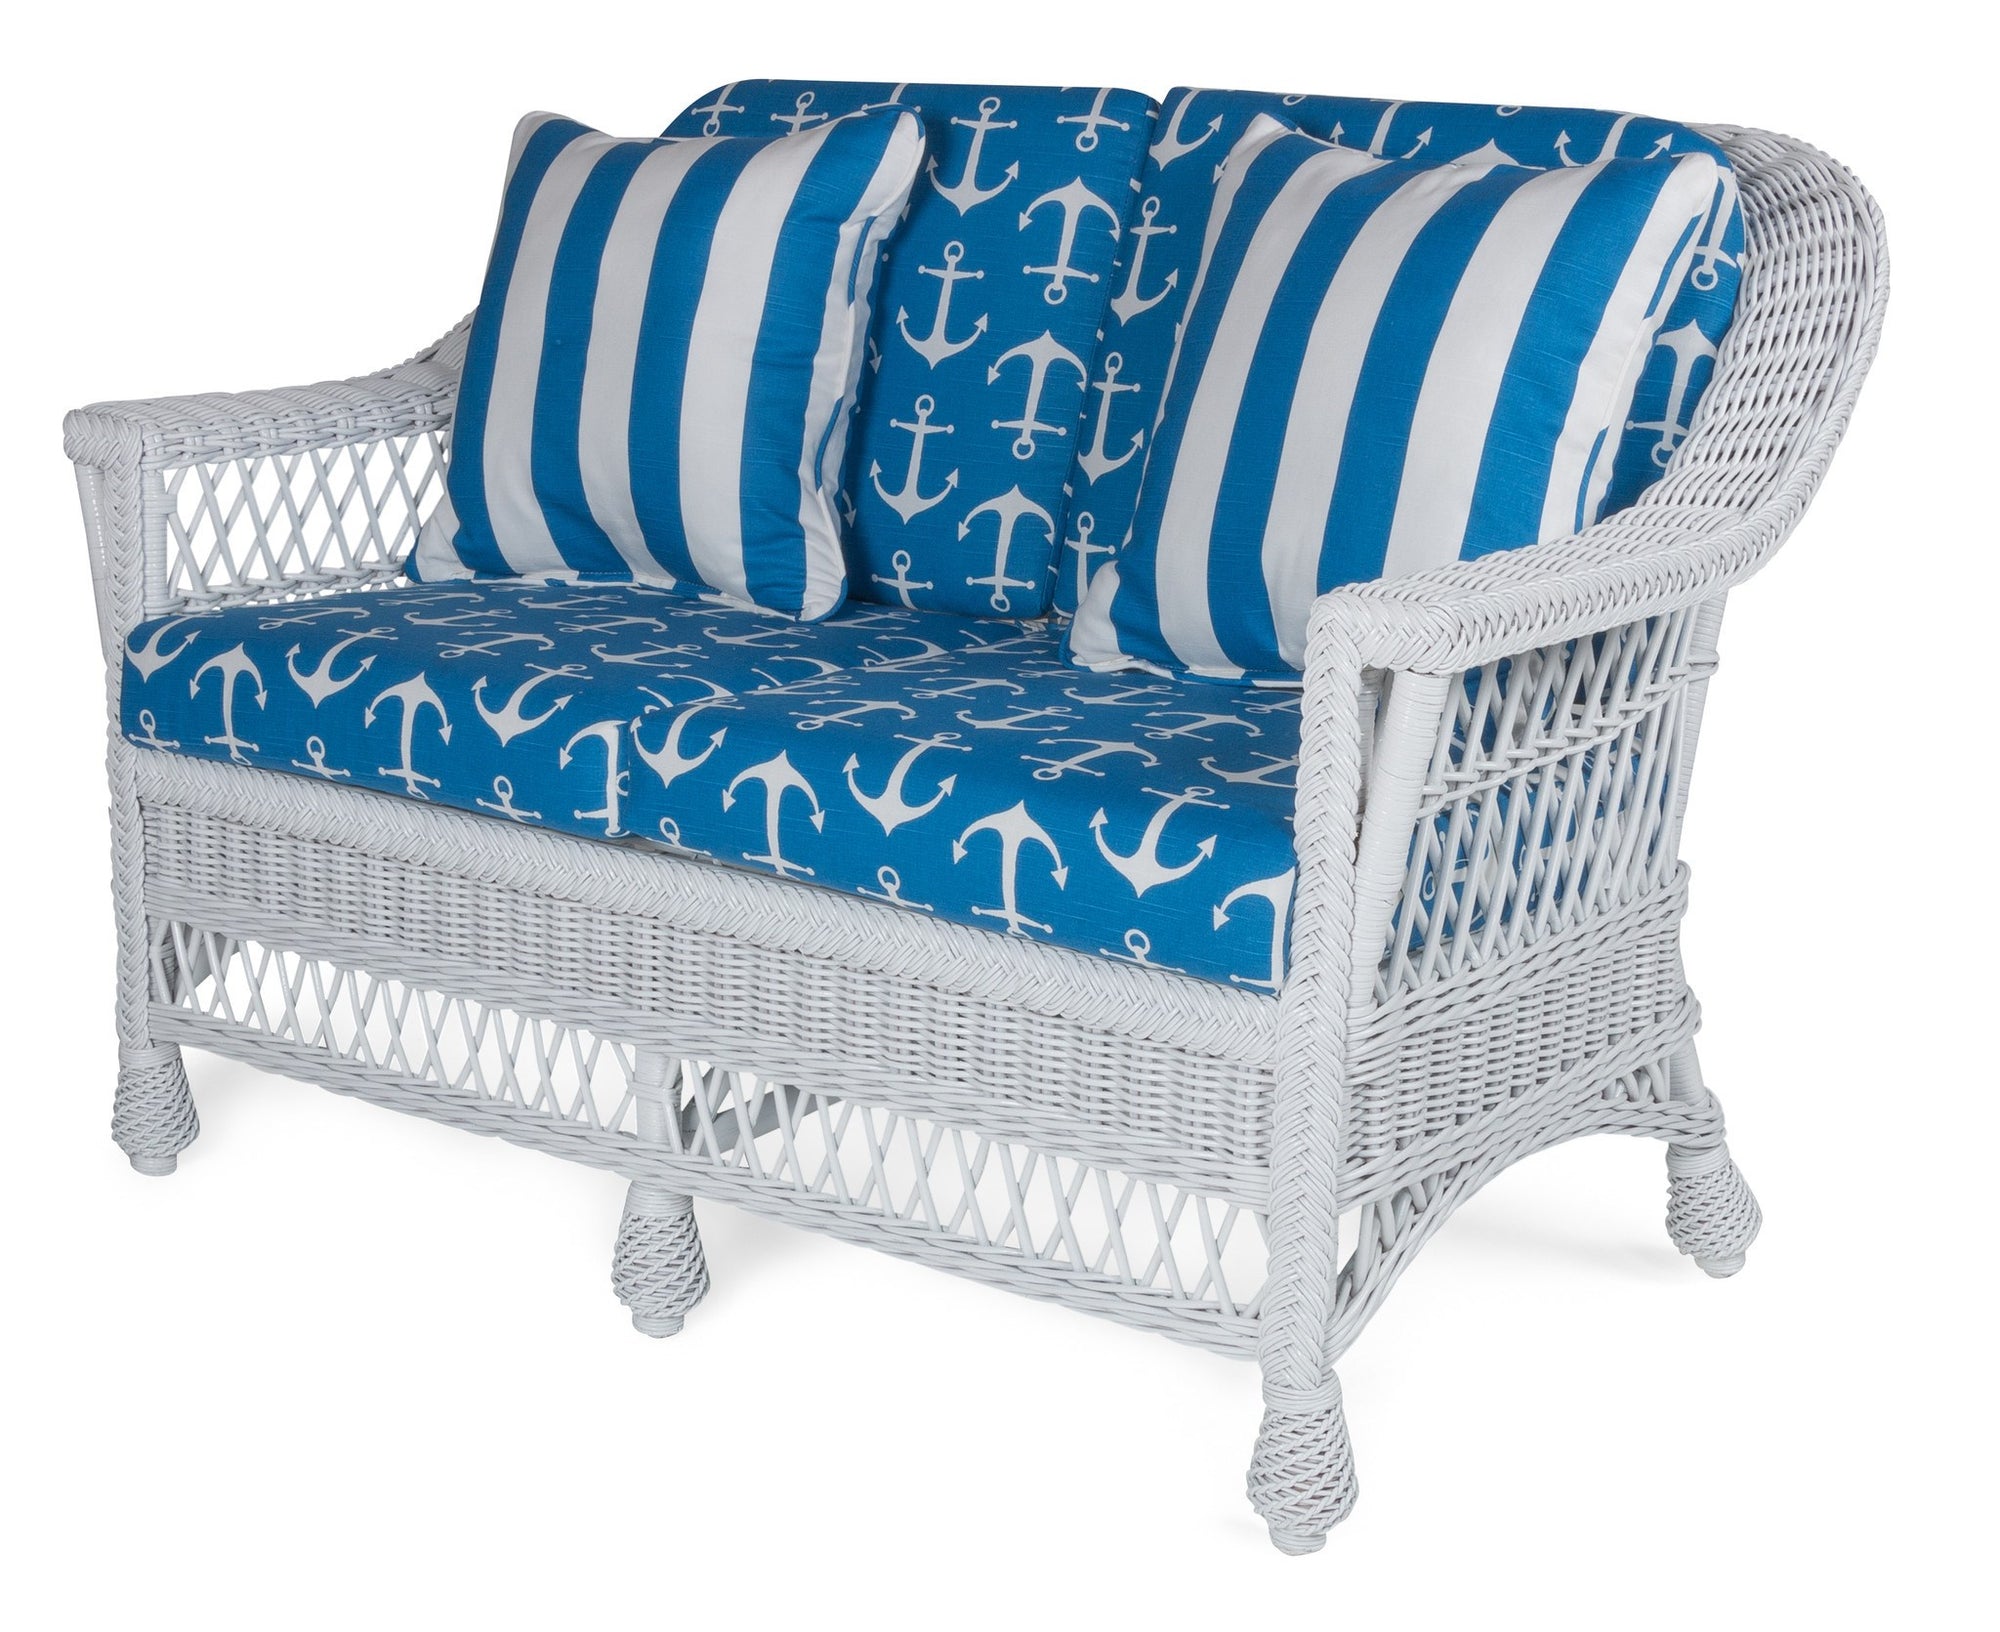 Designer Wicker & Rattan By Tribor Harbor Front Loveseat Designer Wicker from Tribor Loveseat - Rattan Imports